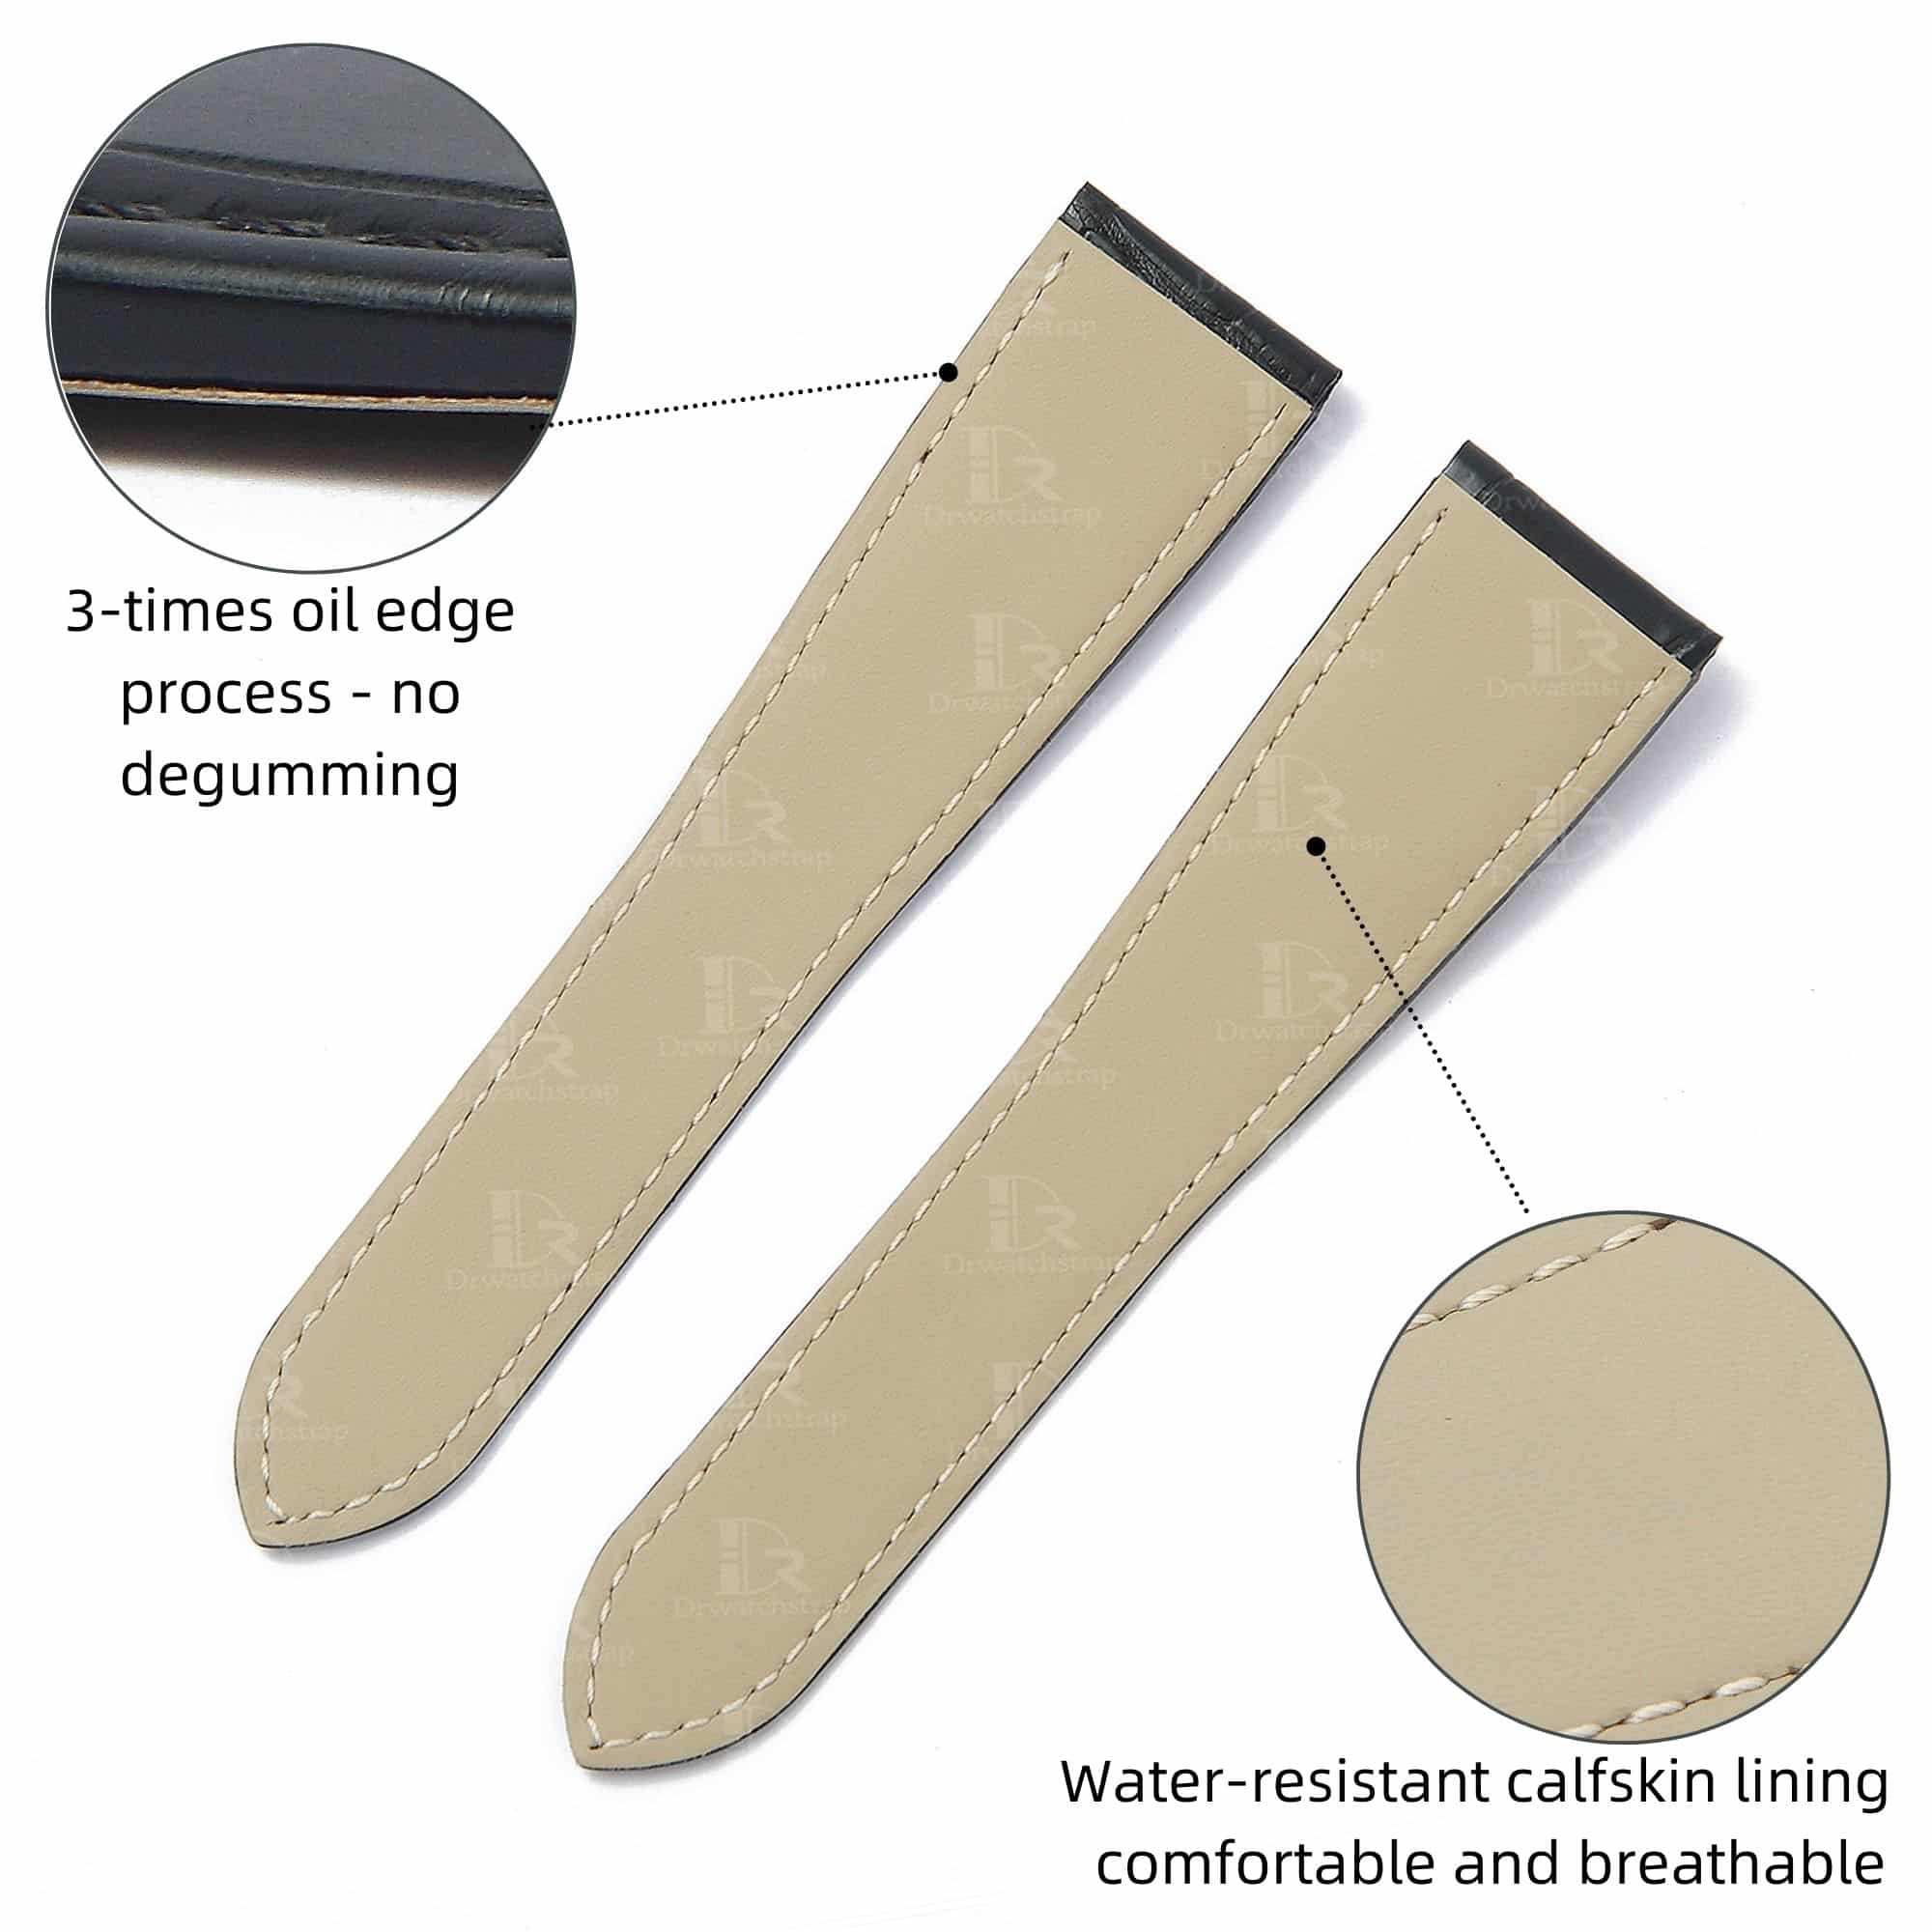 Best quality OEM high-end replacement black alligator crocodile leather Cartier Calibre watch strap and watch band for Cartier Calibre dive watches online - Aftermarket leather watchbands for Cartier Calibre at a low price